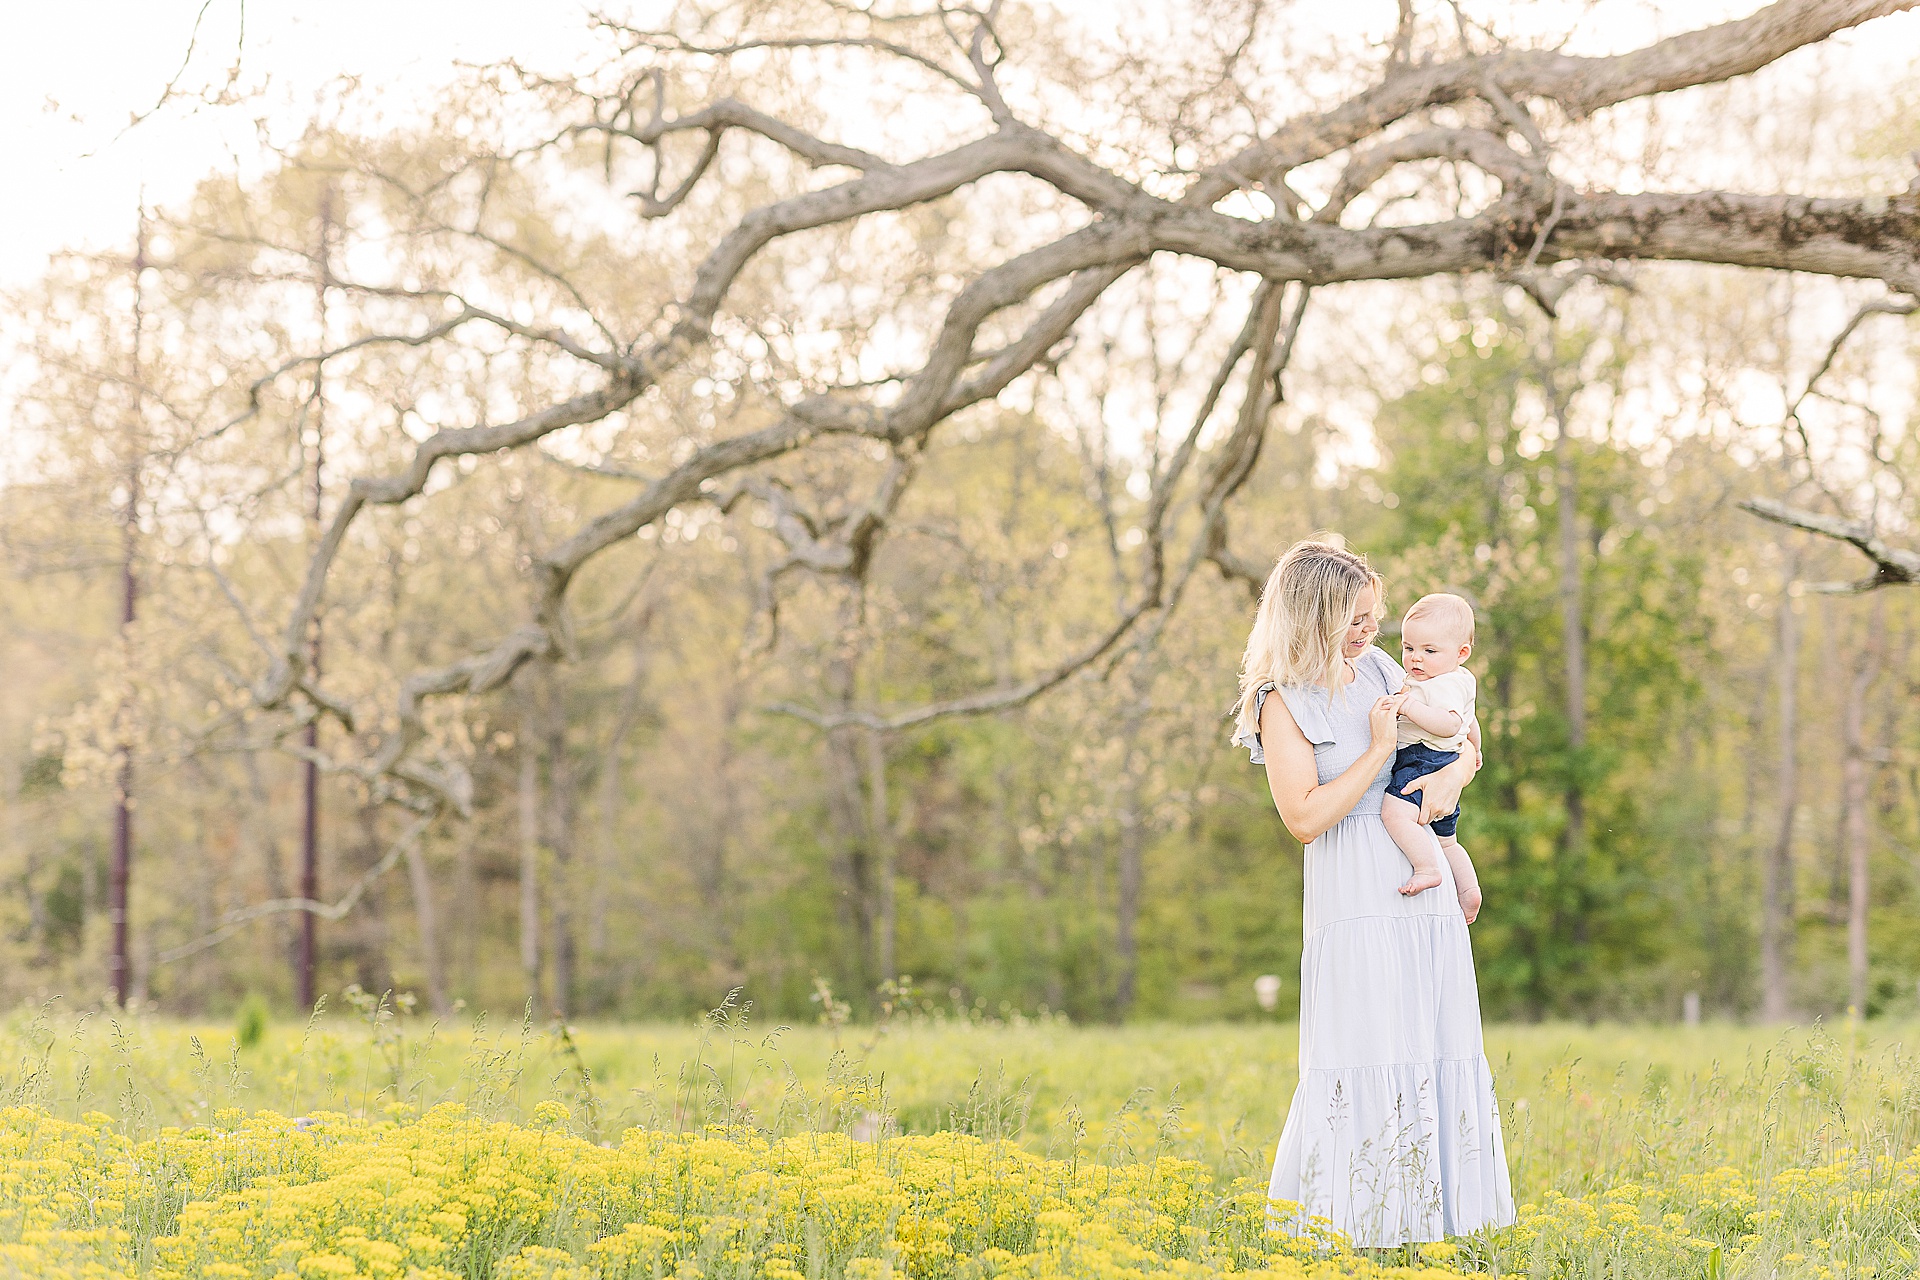 Mom holds baby in field of yellow flowers during 6 month old photo session with Sara Sniderman Photography at Charles River Peninsula in Needham Massachusetts